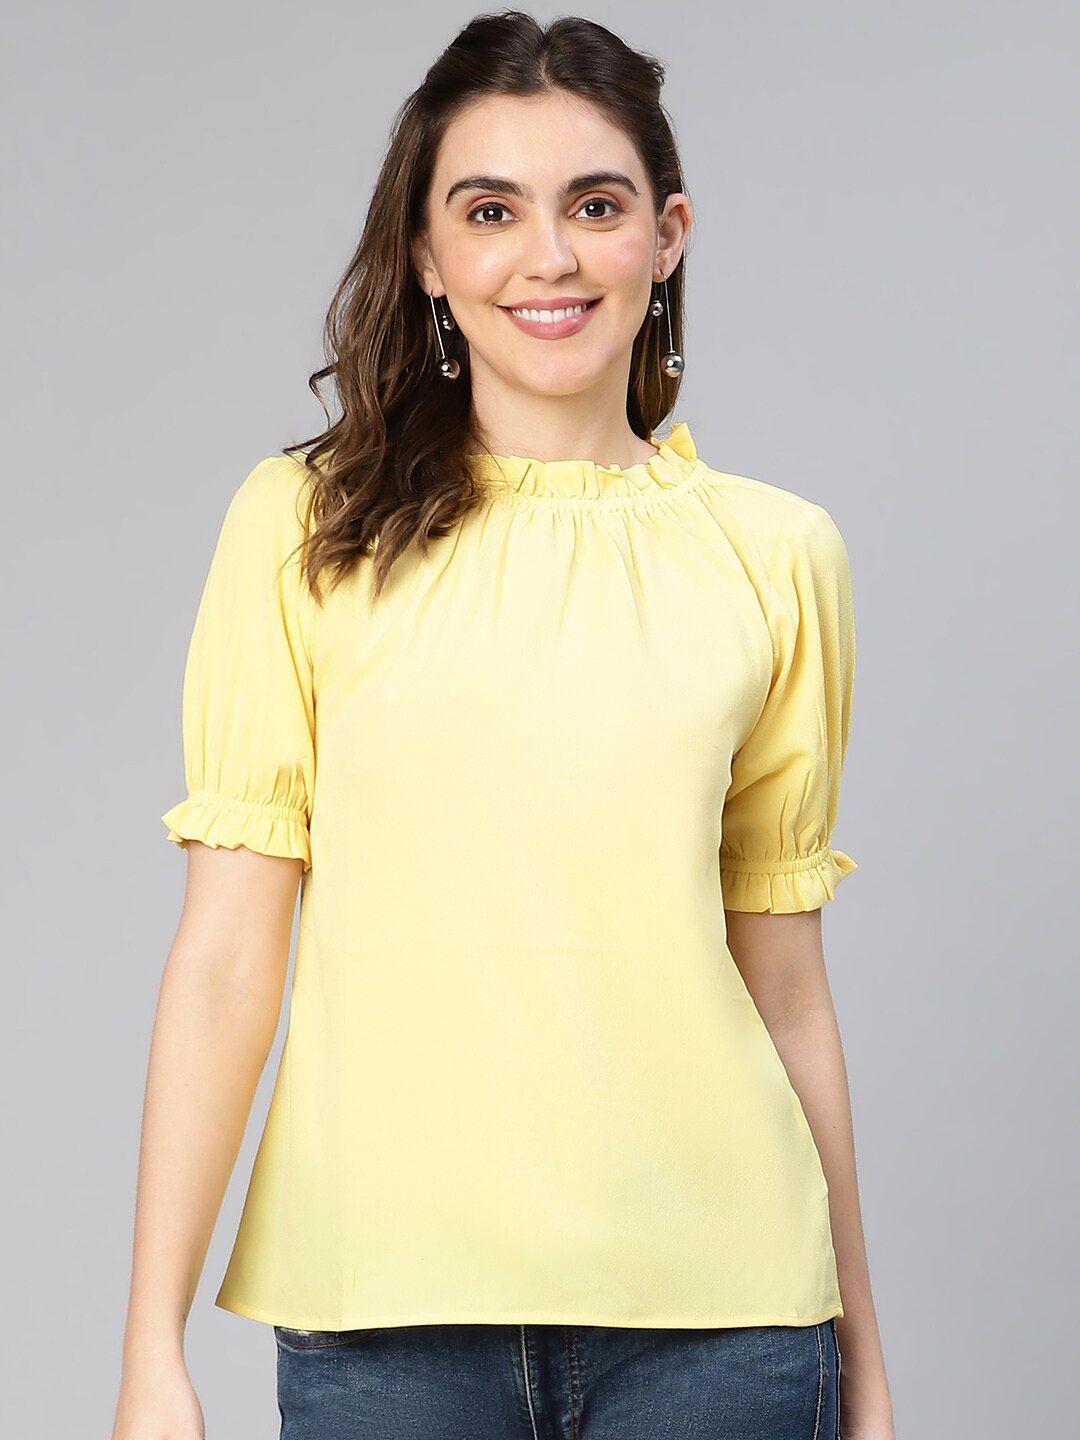 oxolloxo gathered puff sleeves a-line top